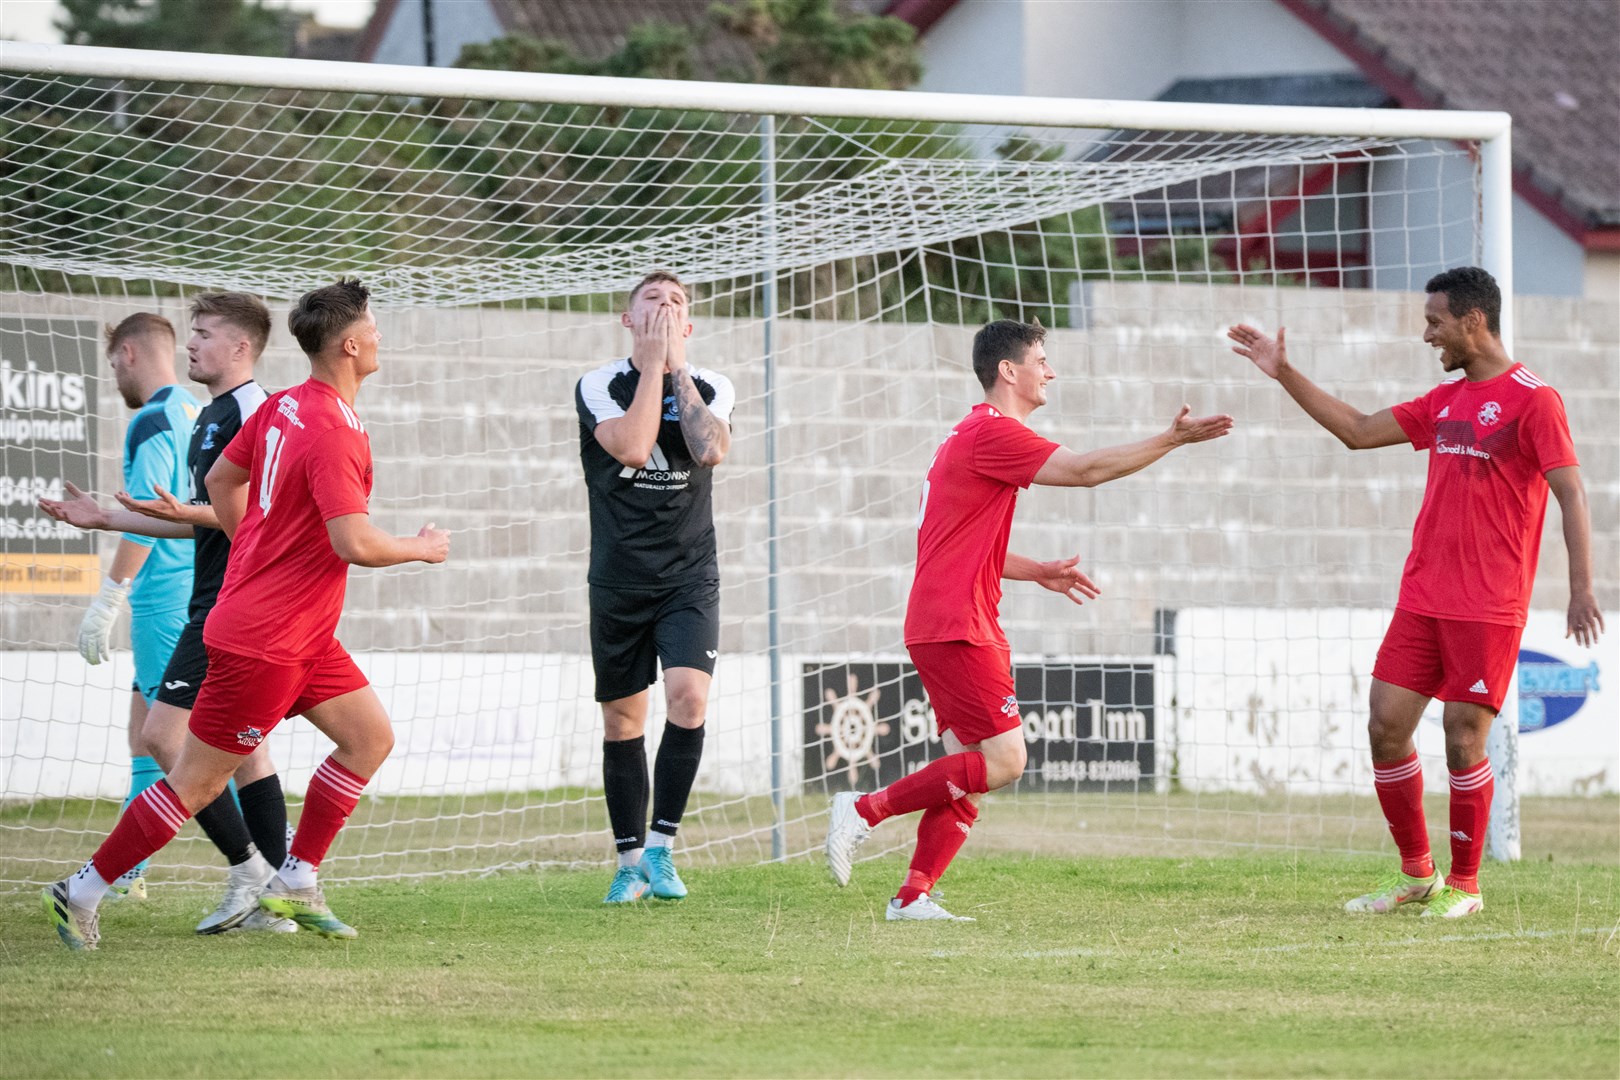 Lossiemouth captain Liam Archibald (centre right) wheels away to celebrate his opener...Lossiemouth FC (4) vs Strathspey Thistle (2) - Highland Football League 22/23 - Grant Park, Lossiemouth 24/08/2022...Picture: Daniel Forsyth..